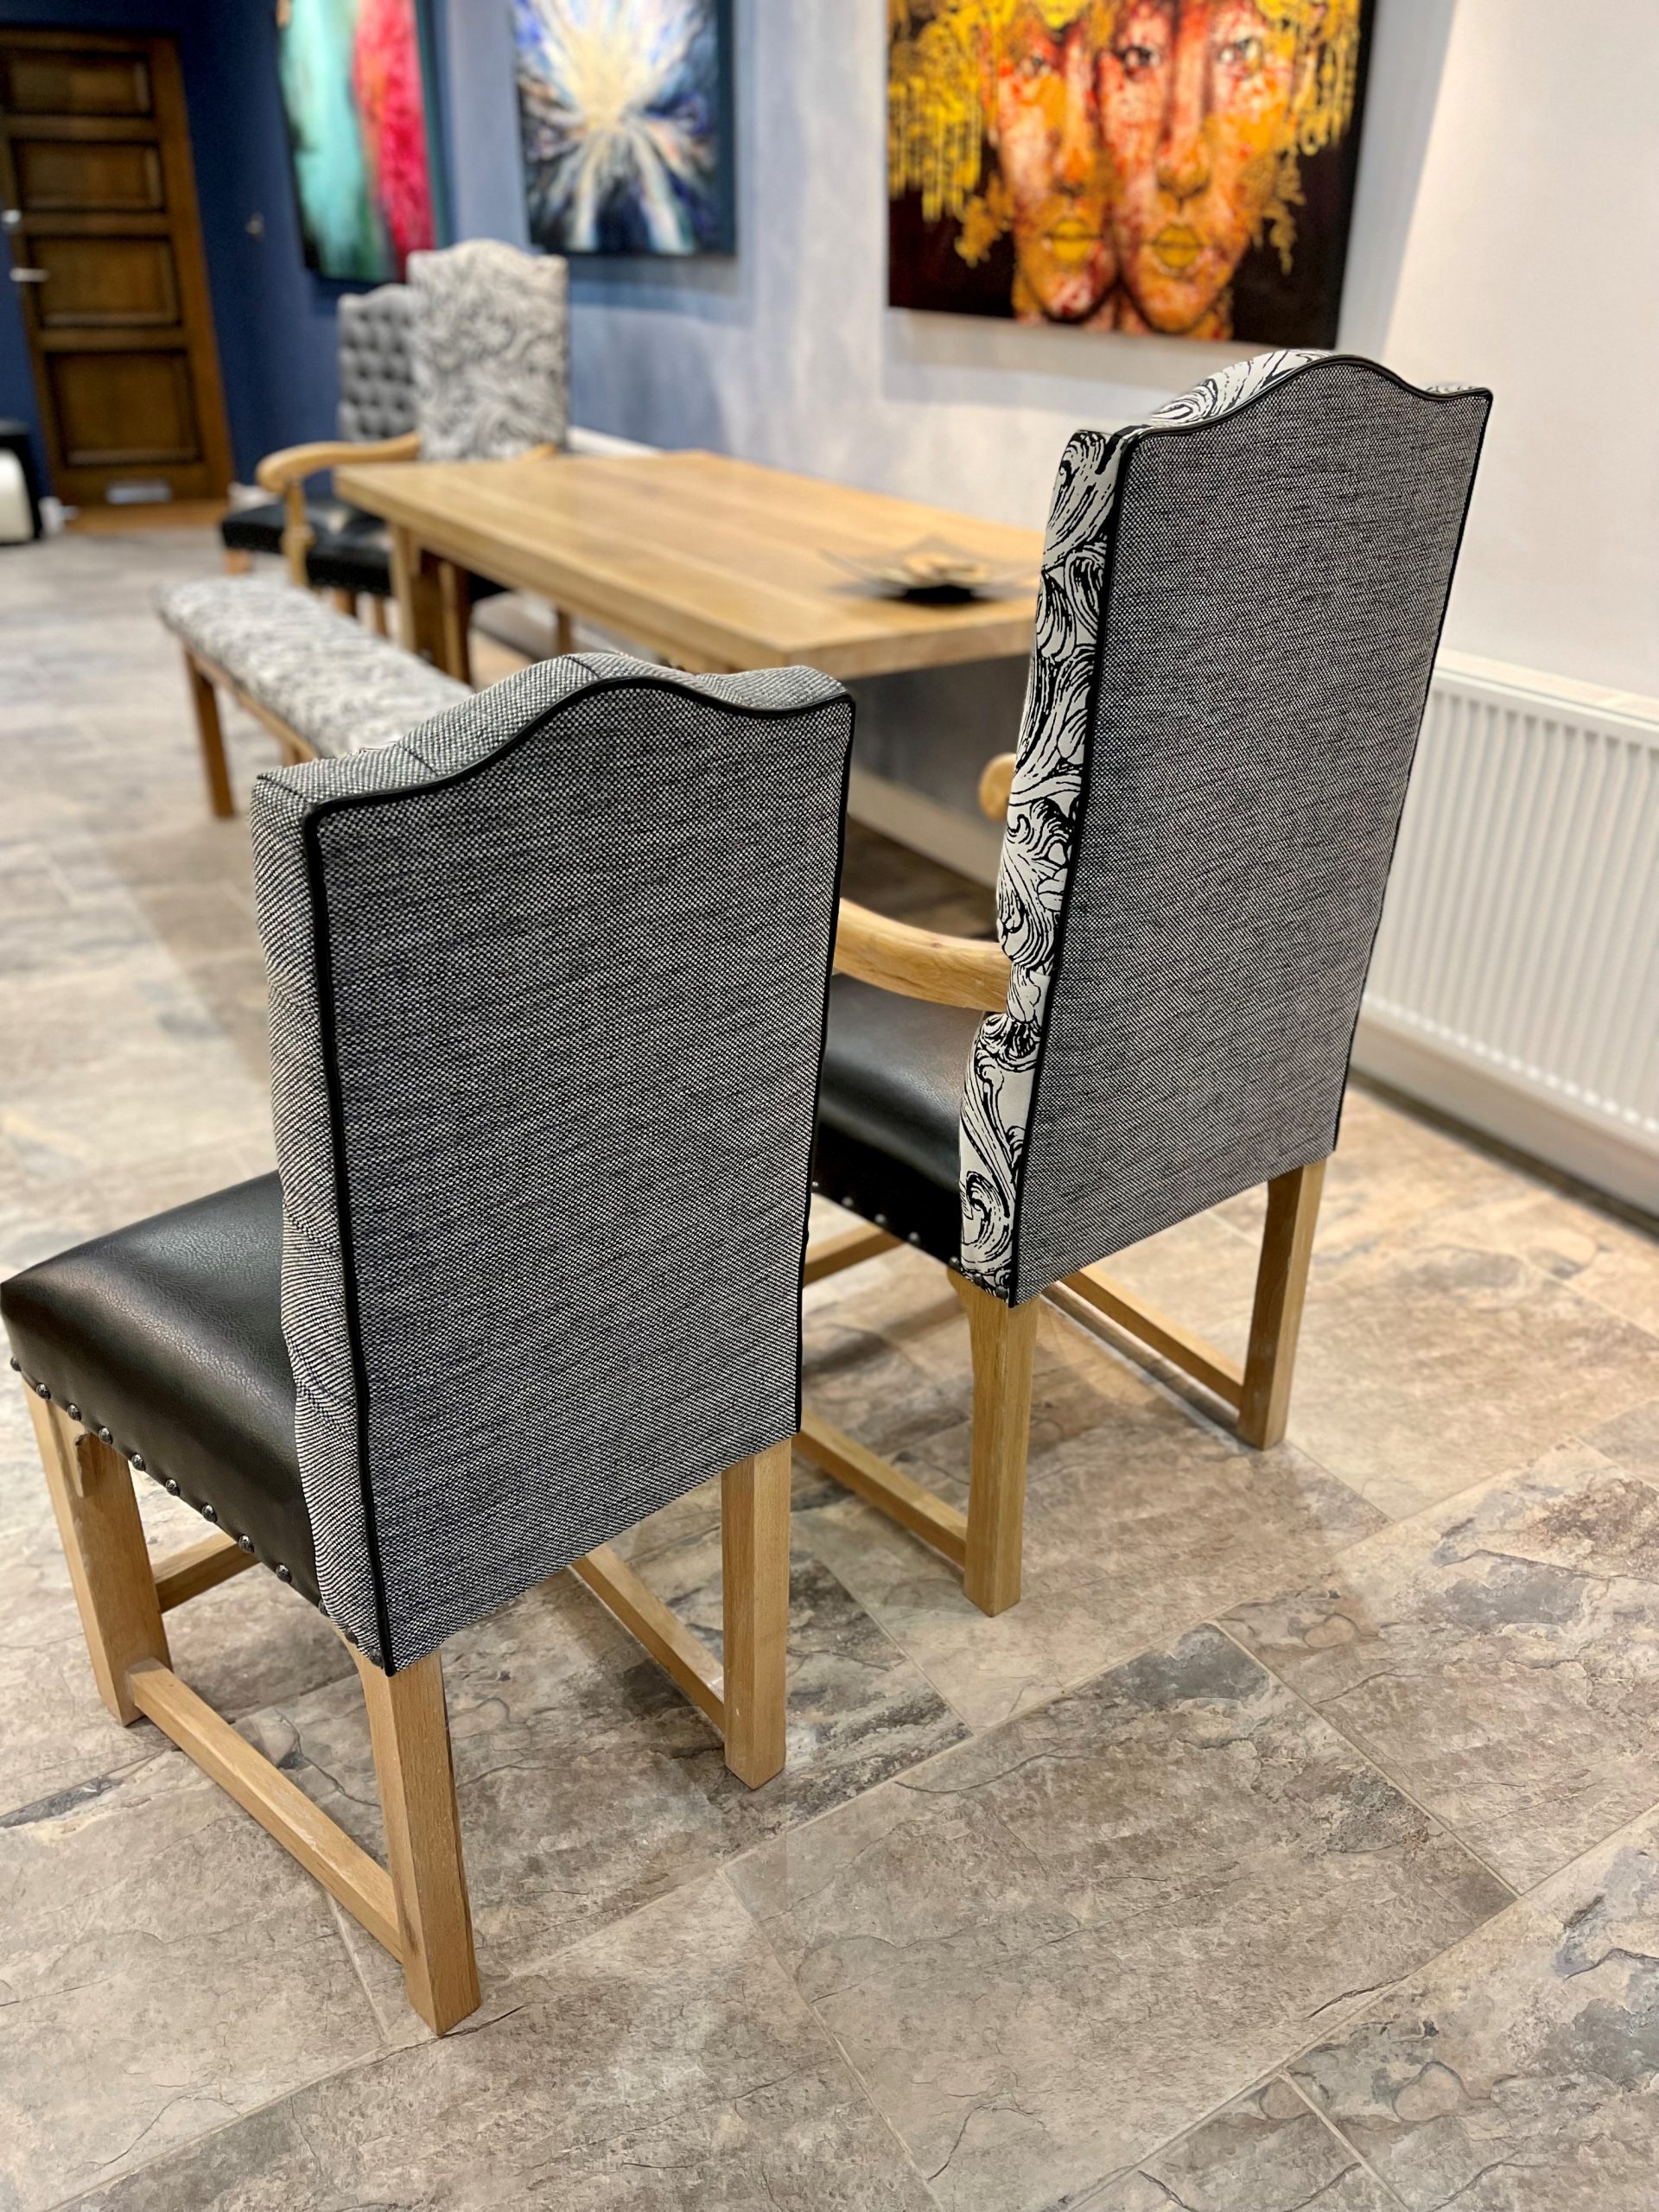 Bespoke Chair Makers